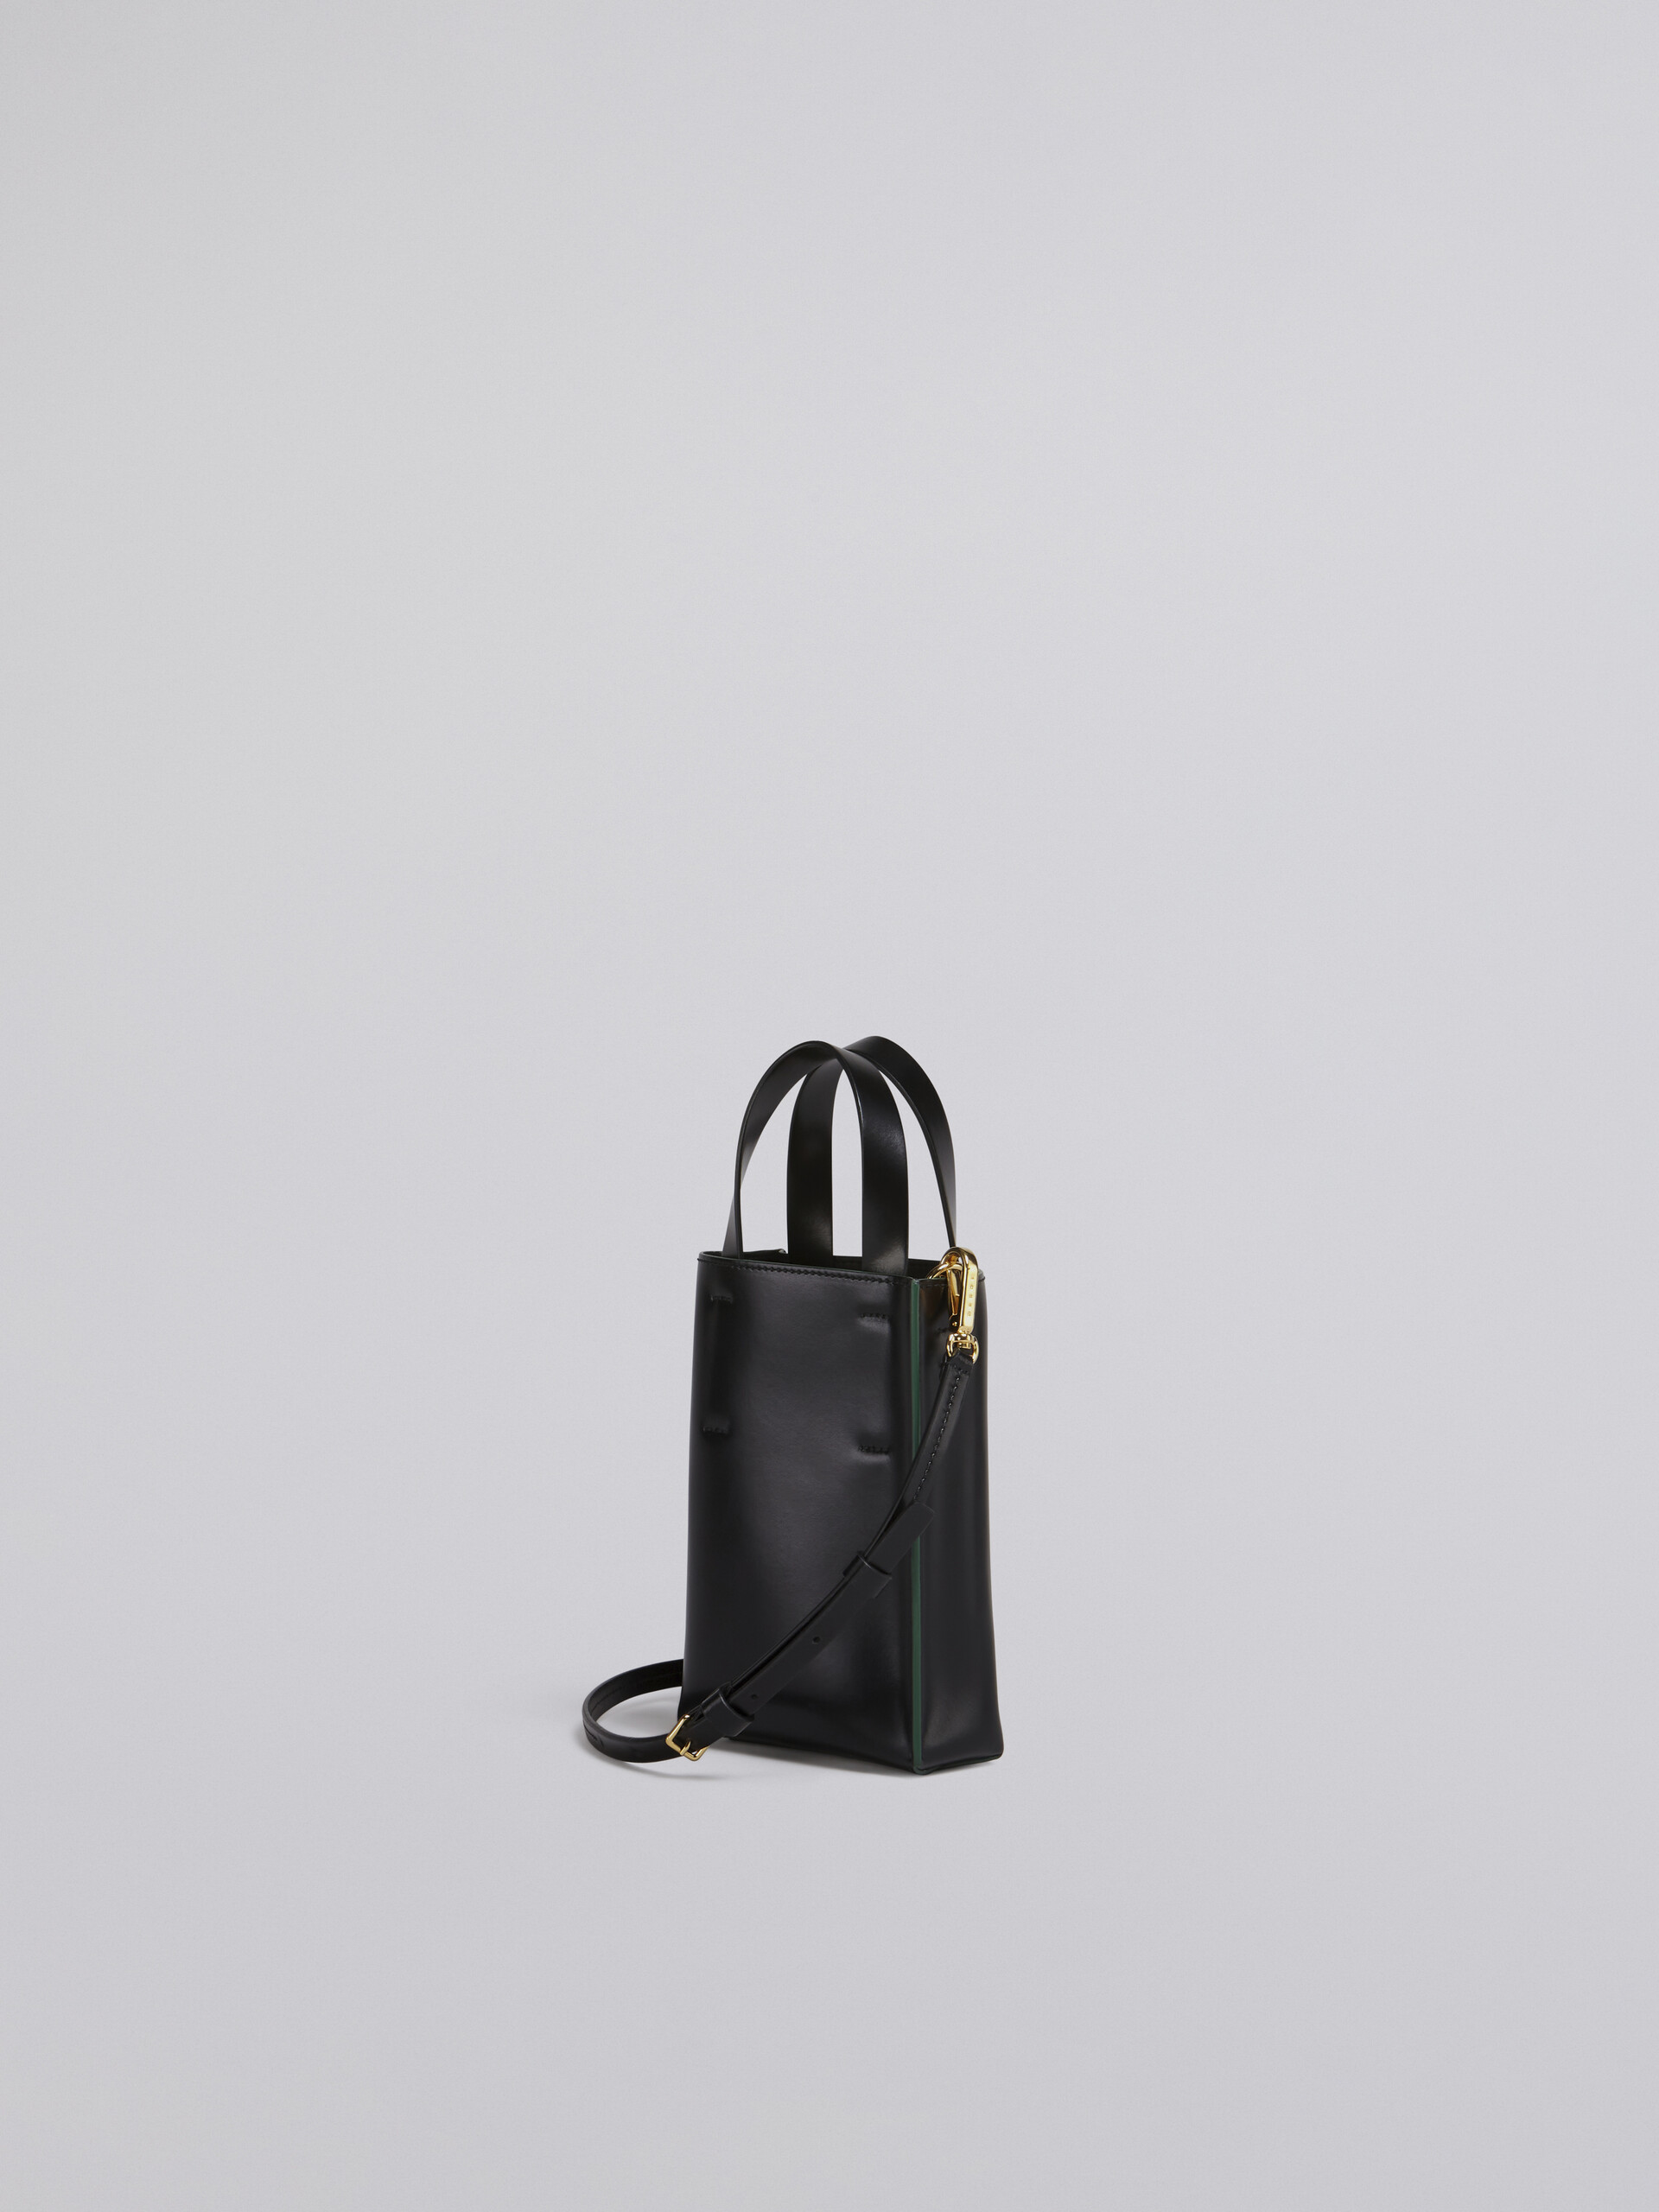 MUSEO nano bag in black shiny leather - Shopping Bags - Image 2